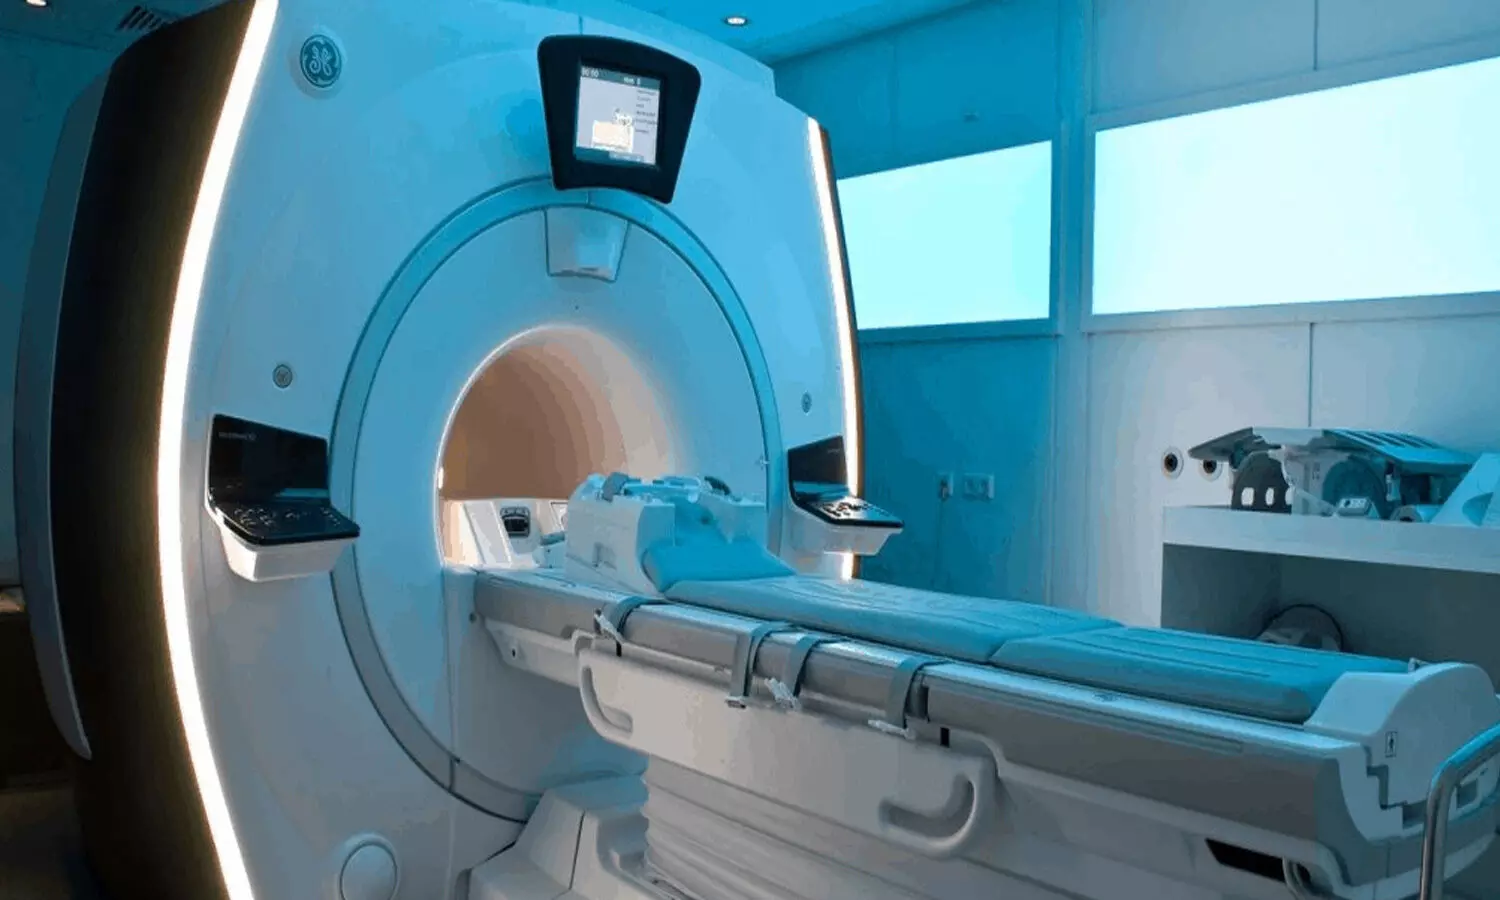 MRI reduces overdiagnoses by half in prostate cancer screening: Study